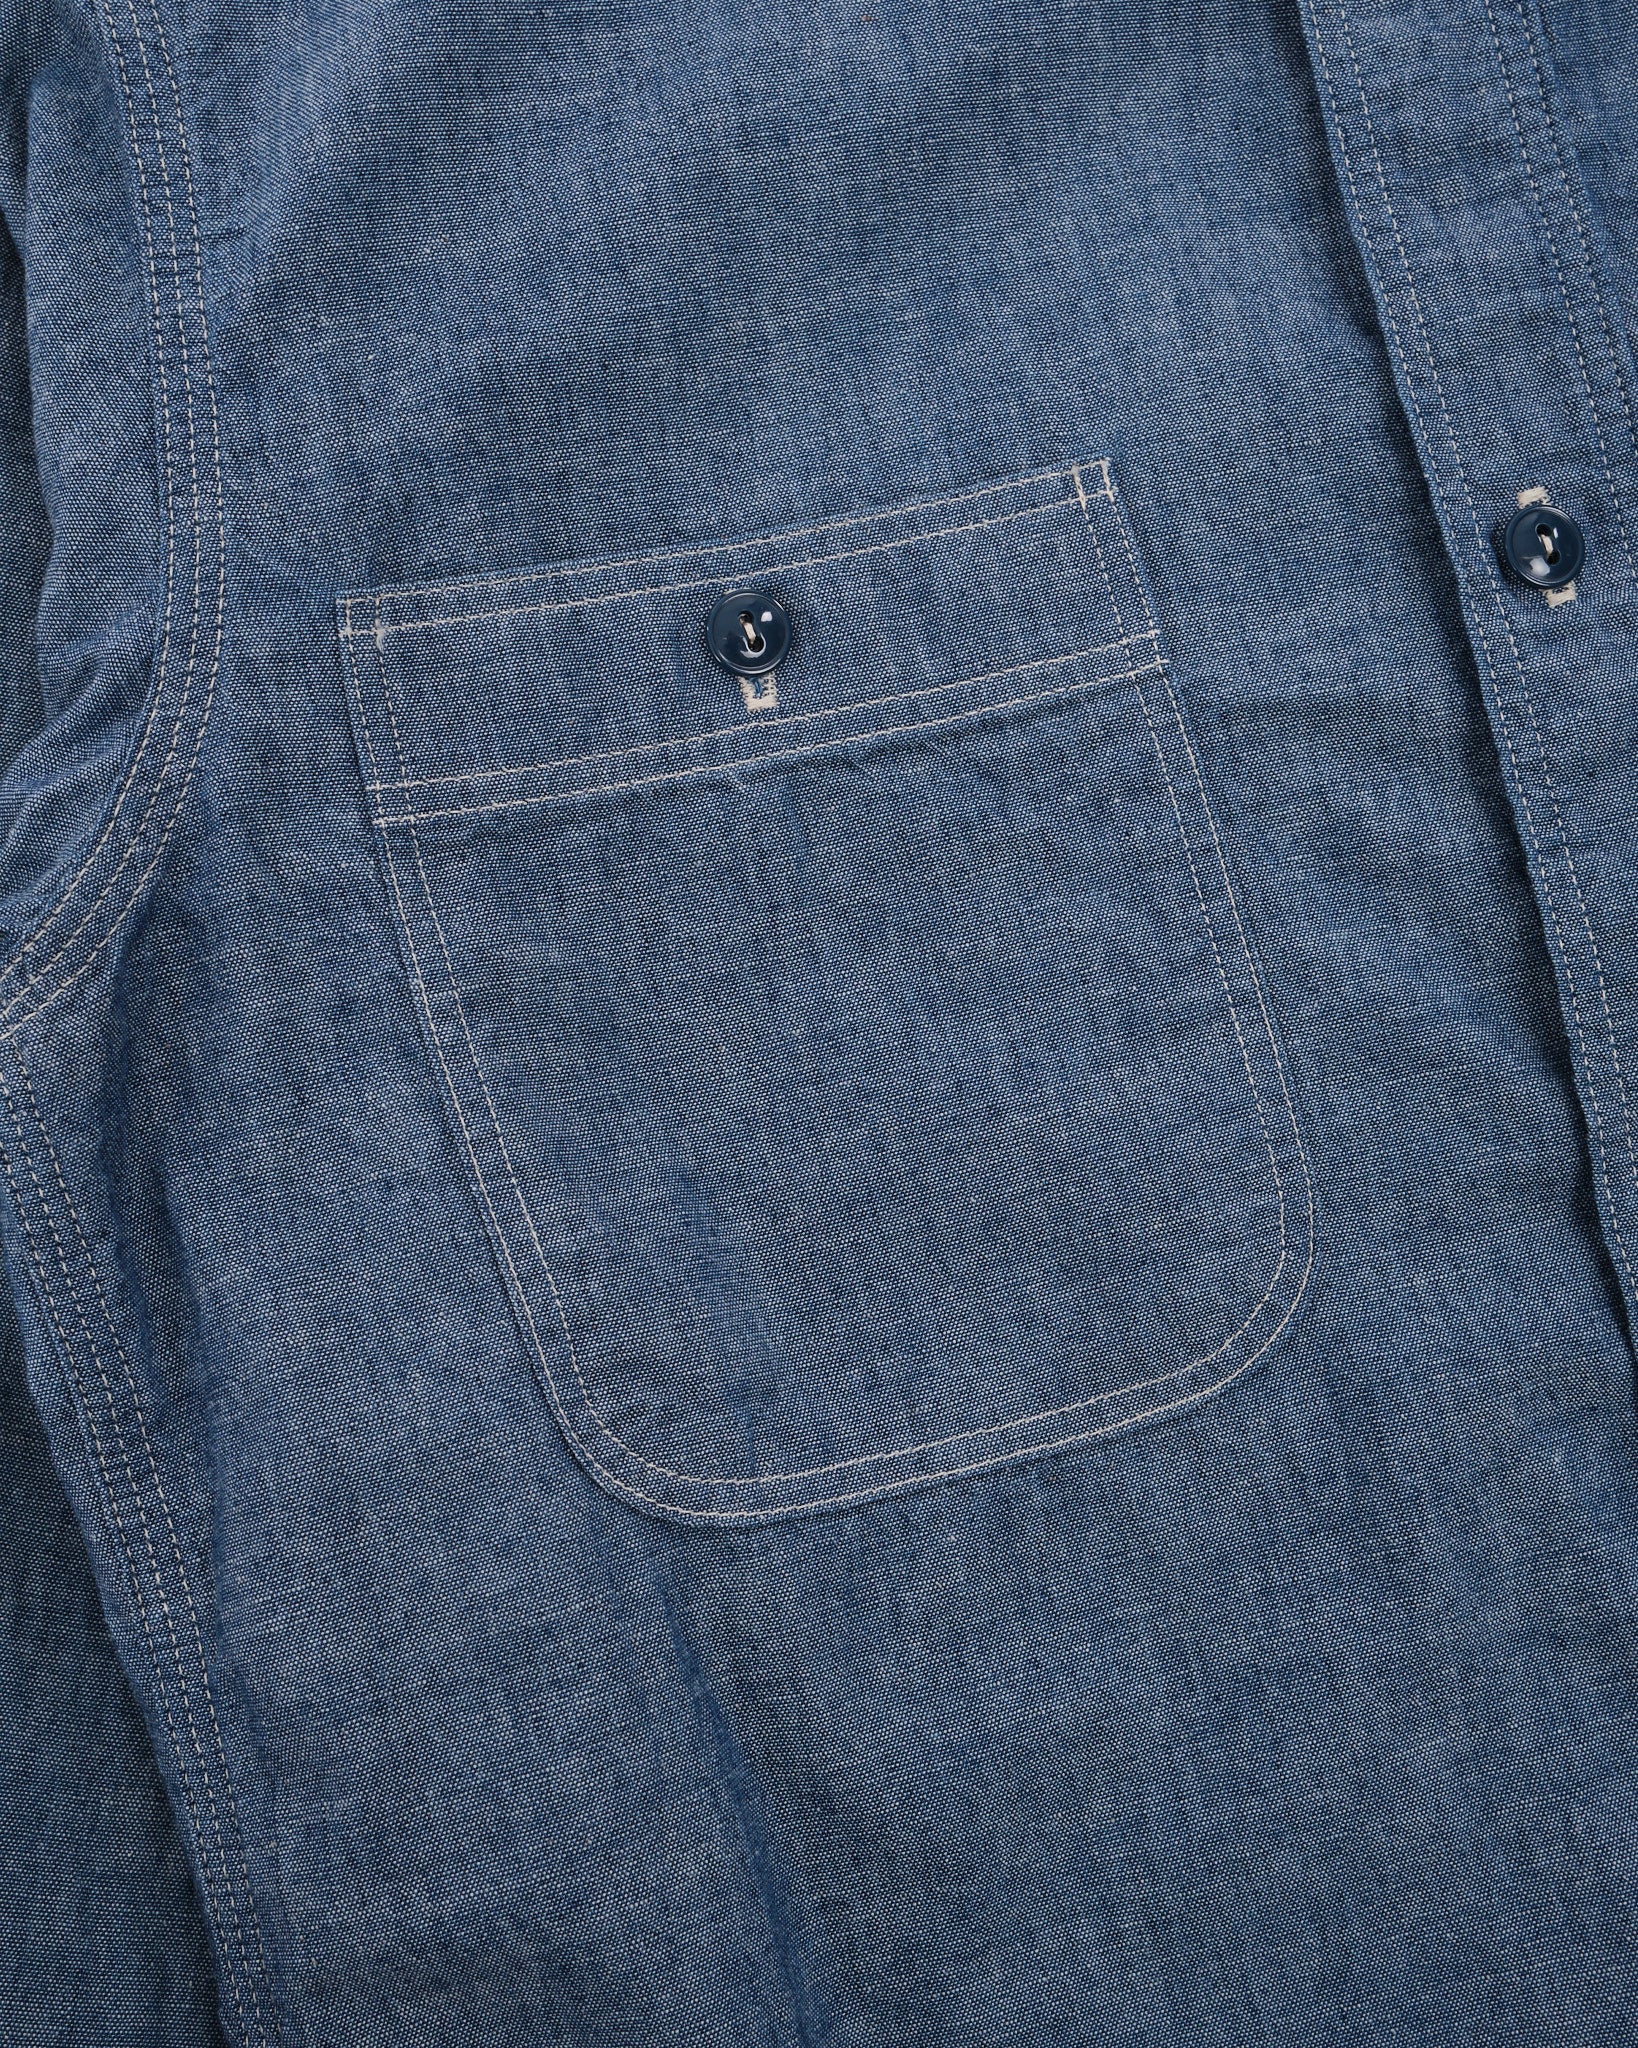 CHAMBRAY WORK SHIRT - Meadow